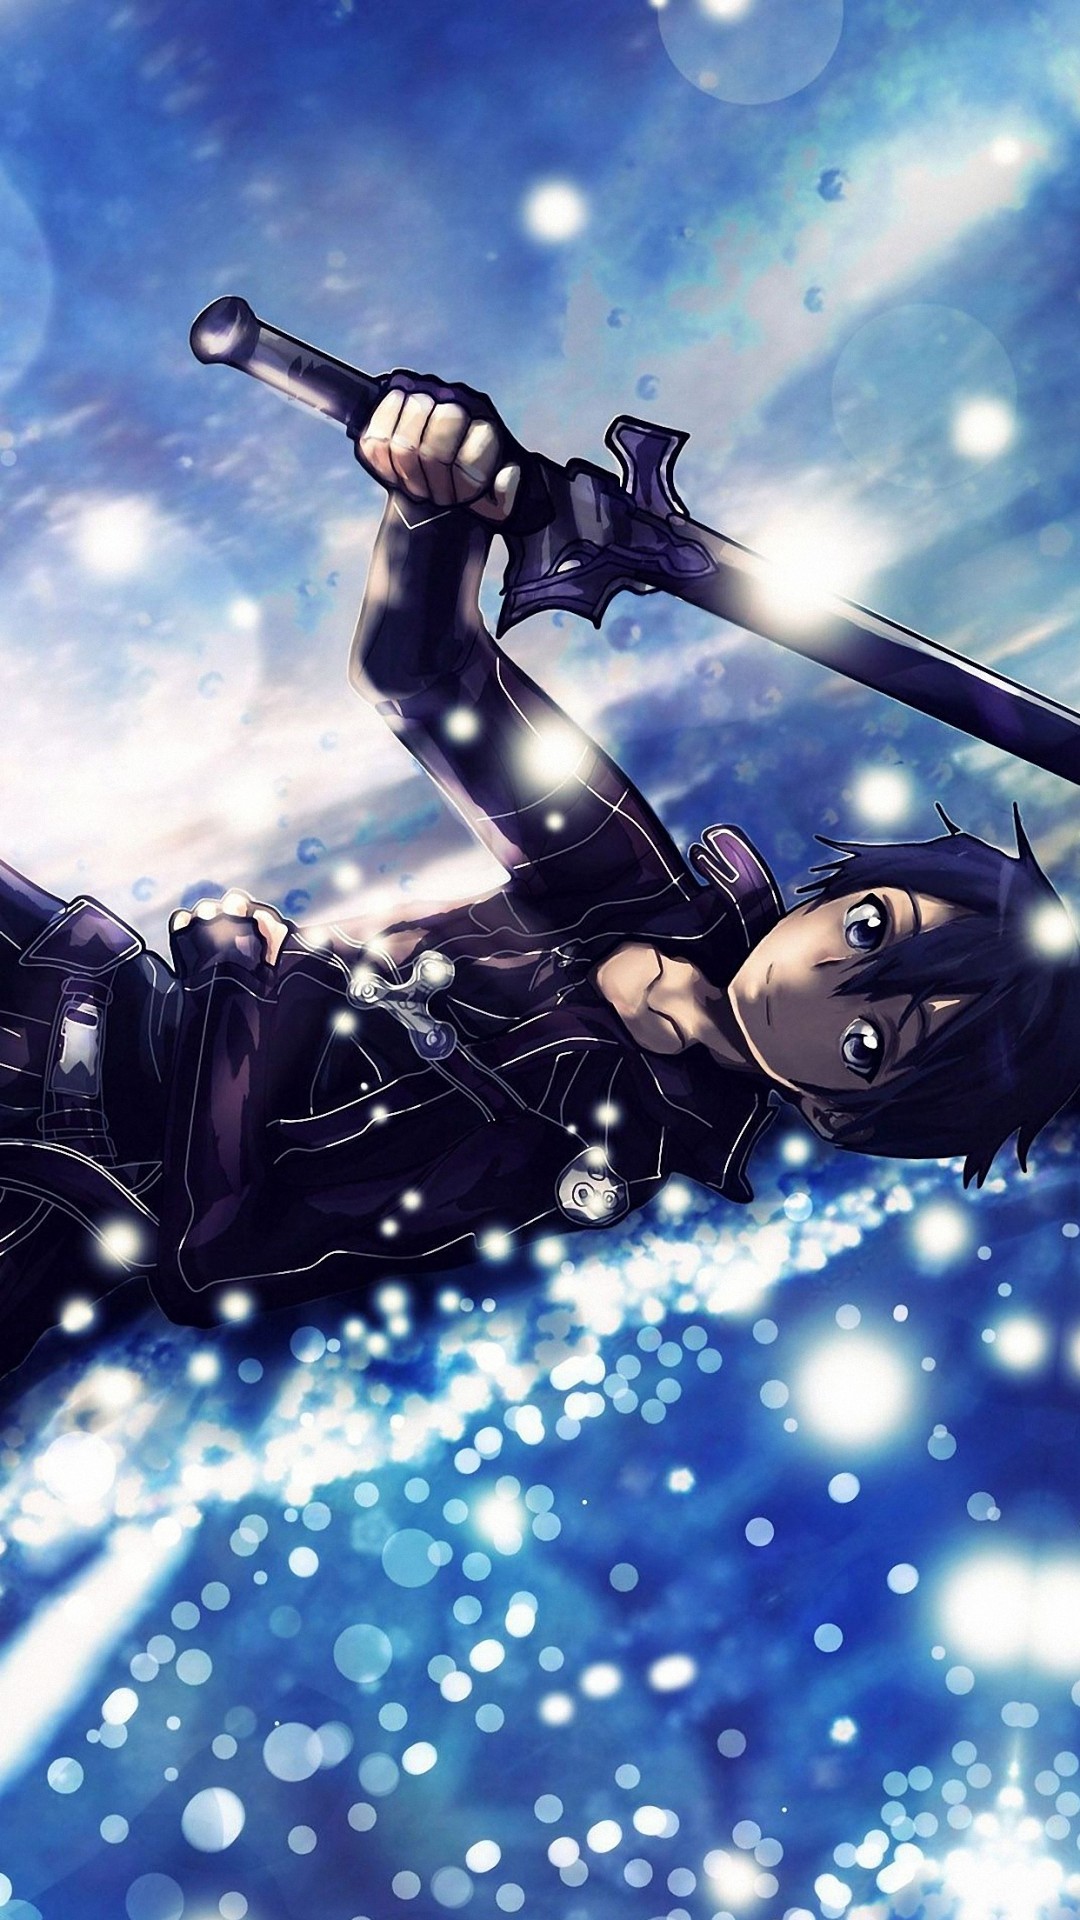 sword art online wallpaper iphone,anime,fictional character,cool,illustration,games